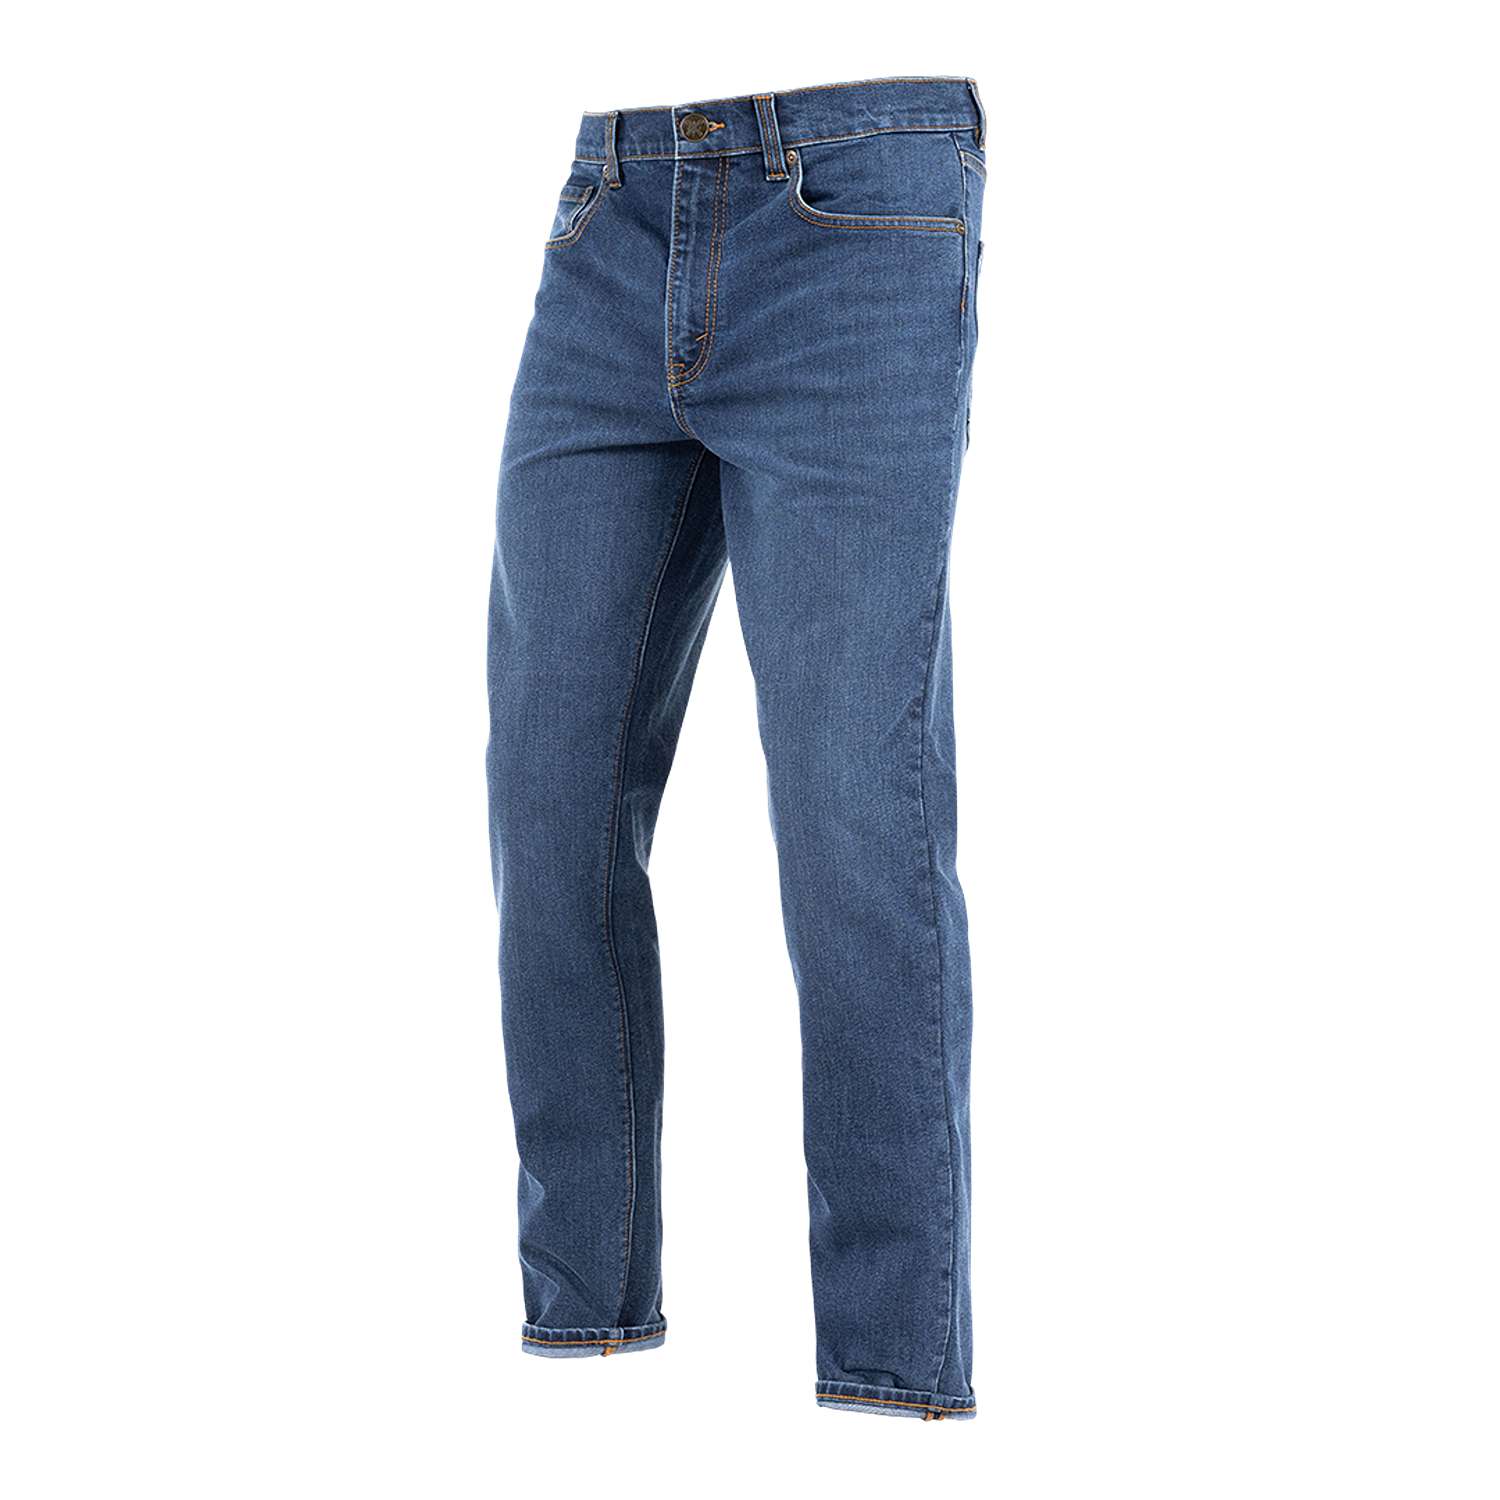 Image of John Doe Classic Tapered Jeans Indigo Taille W34/L32